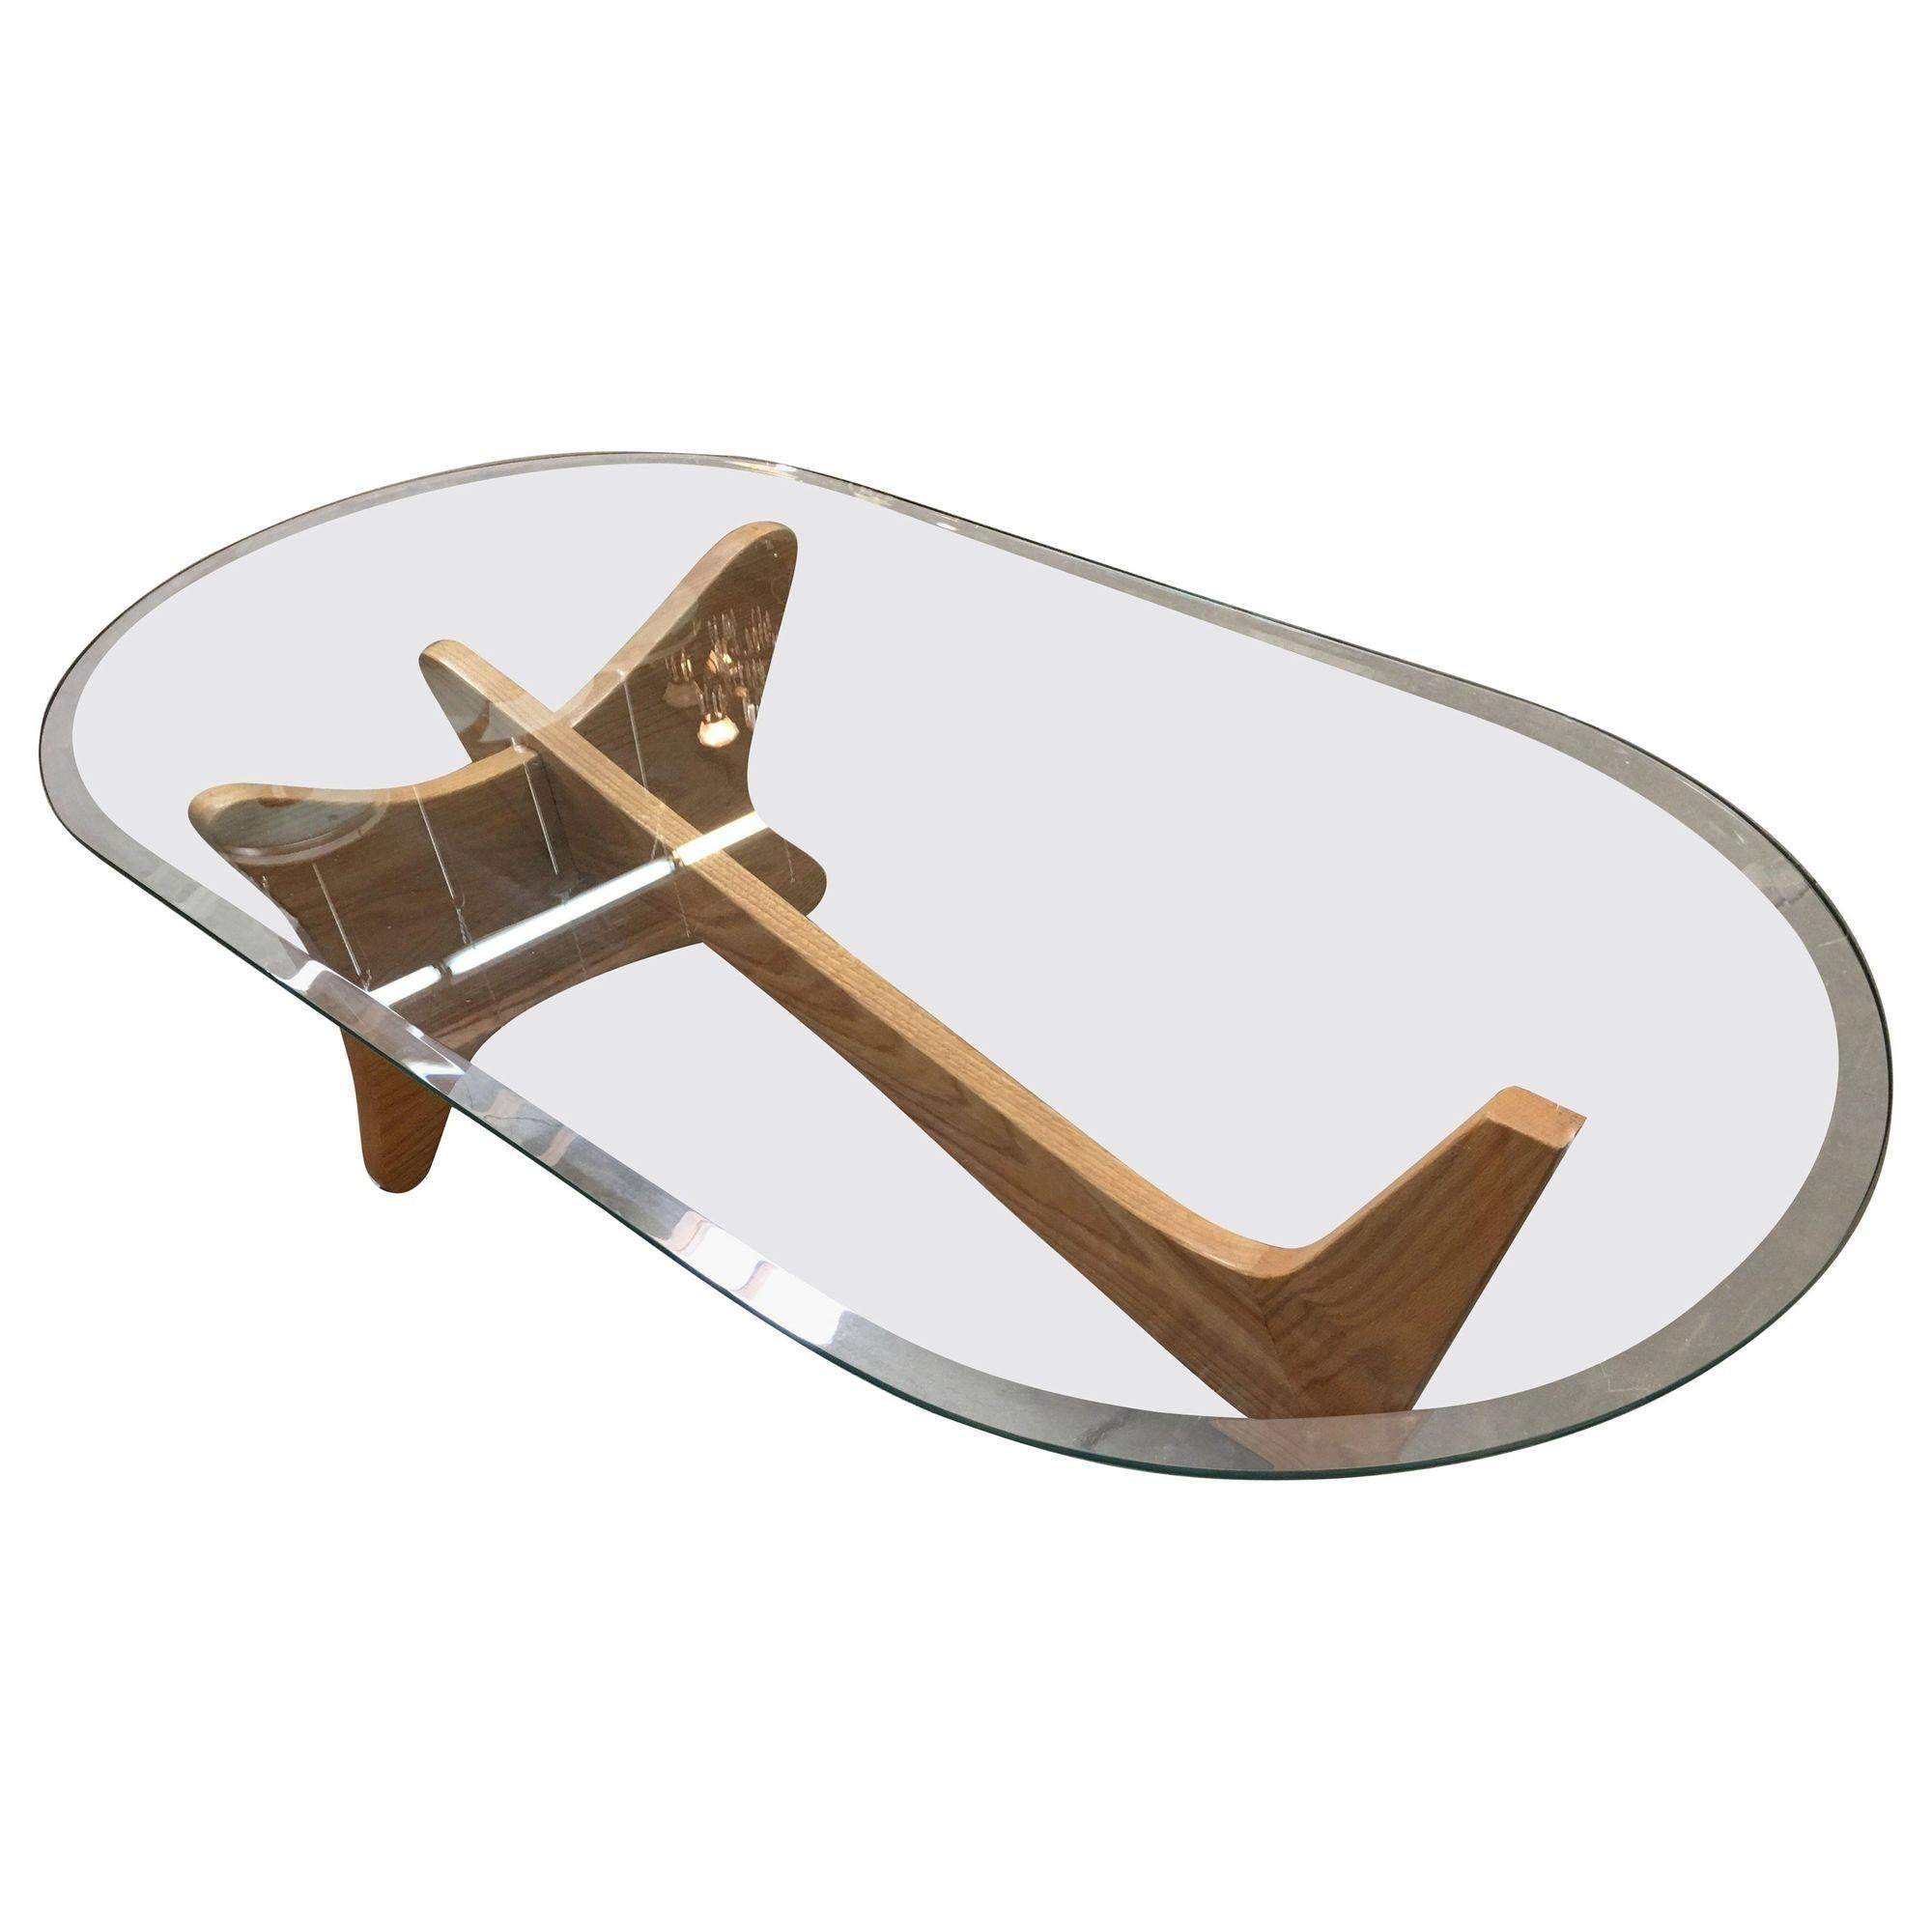 This 1950s biomorphic coffee table, in the style of Isamu Noguchi, was nicknamed the 